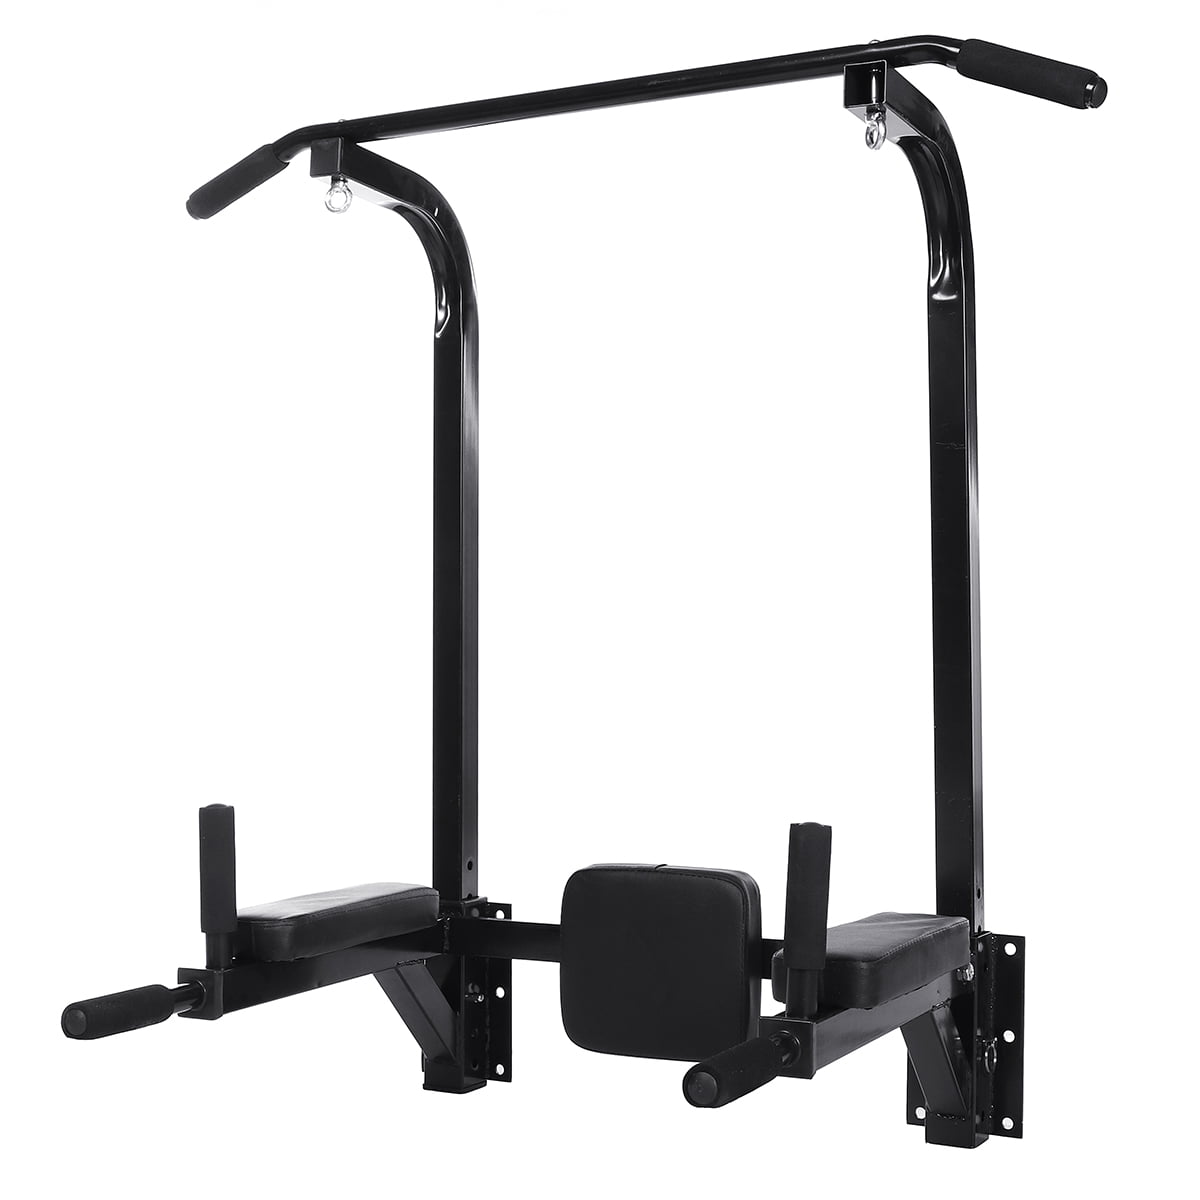 Power Tower Set Training Equipment Fitness Dip Stand Supports to 400 Lbs Home Workout for Home Gym Indoor Exercise MAYQMAY Pull Up Bar Multifunctional Wall Mount Chin Up Bar